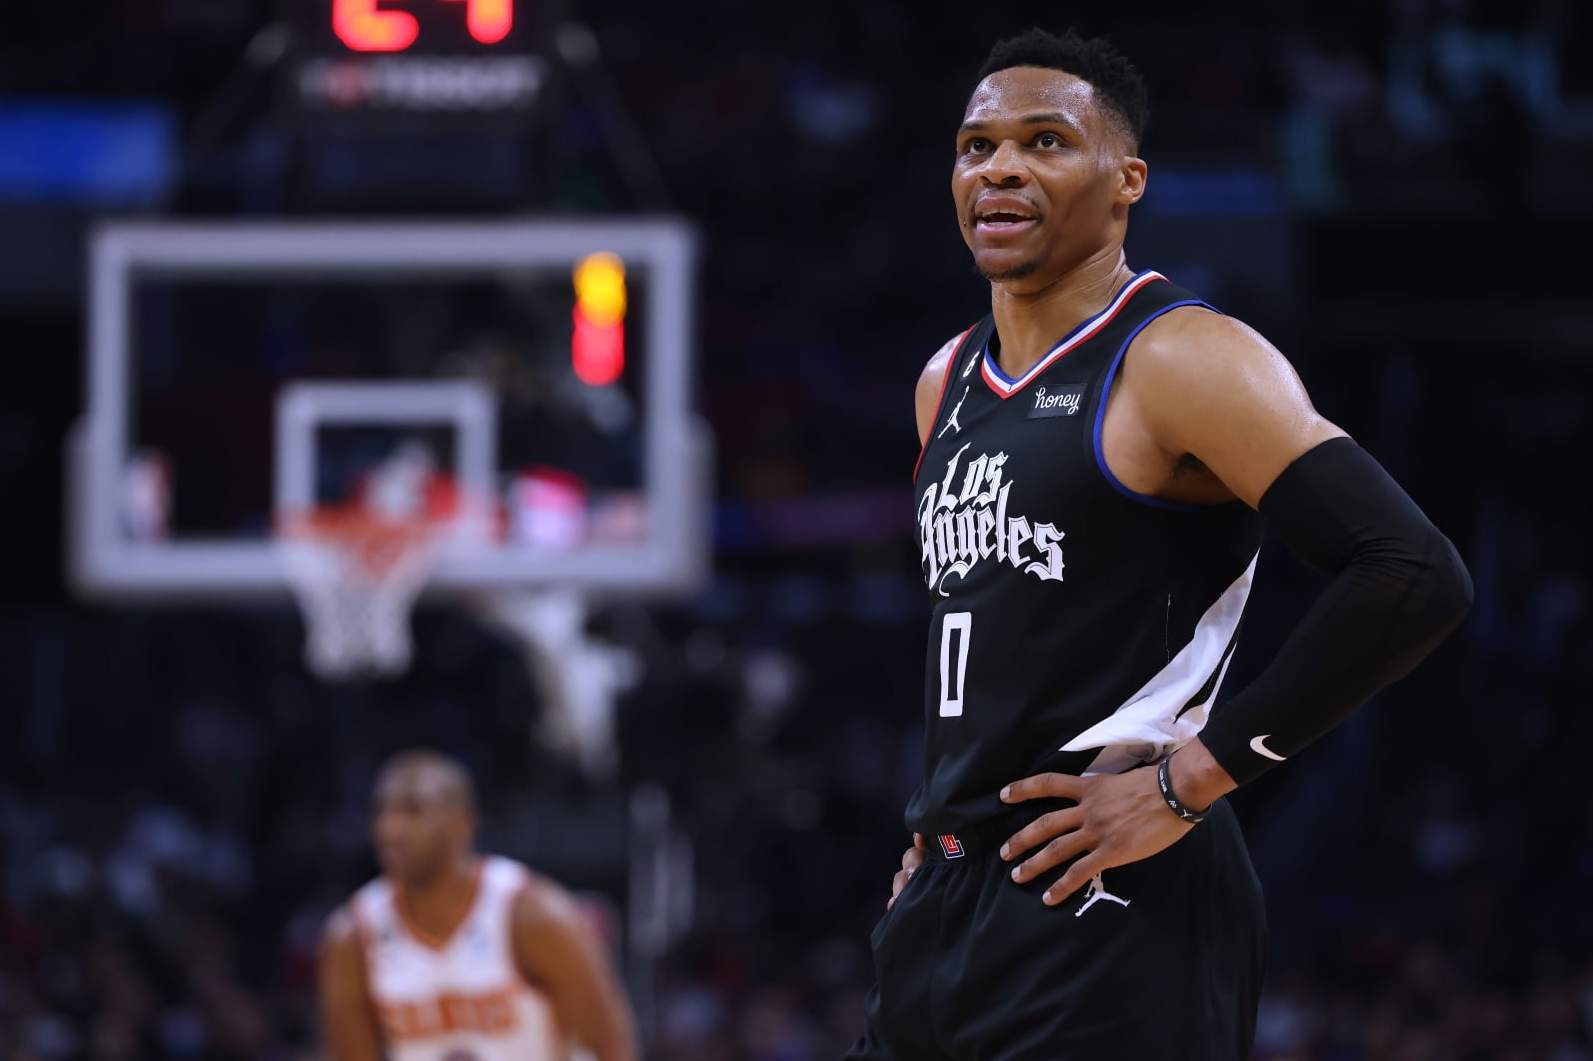 Windhorst: Russell Westbrook's Standing in NBA Is 'Fragile' amid